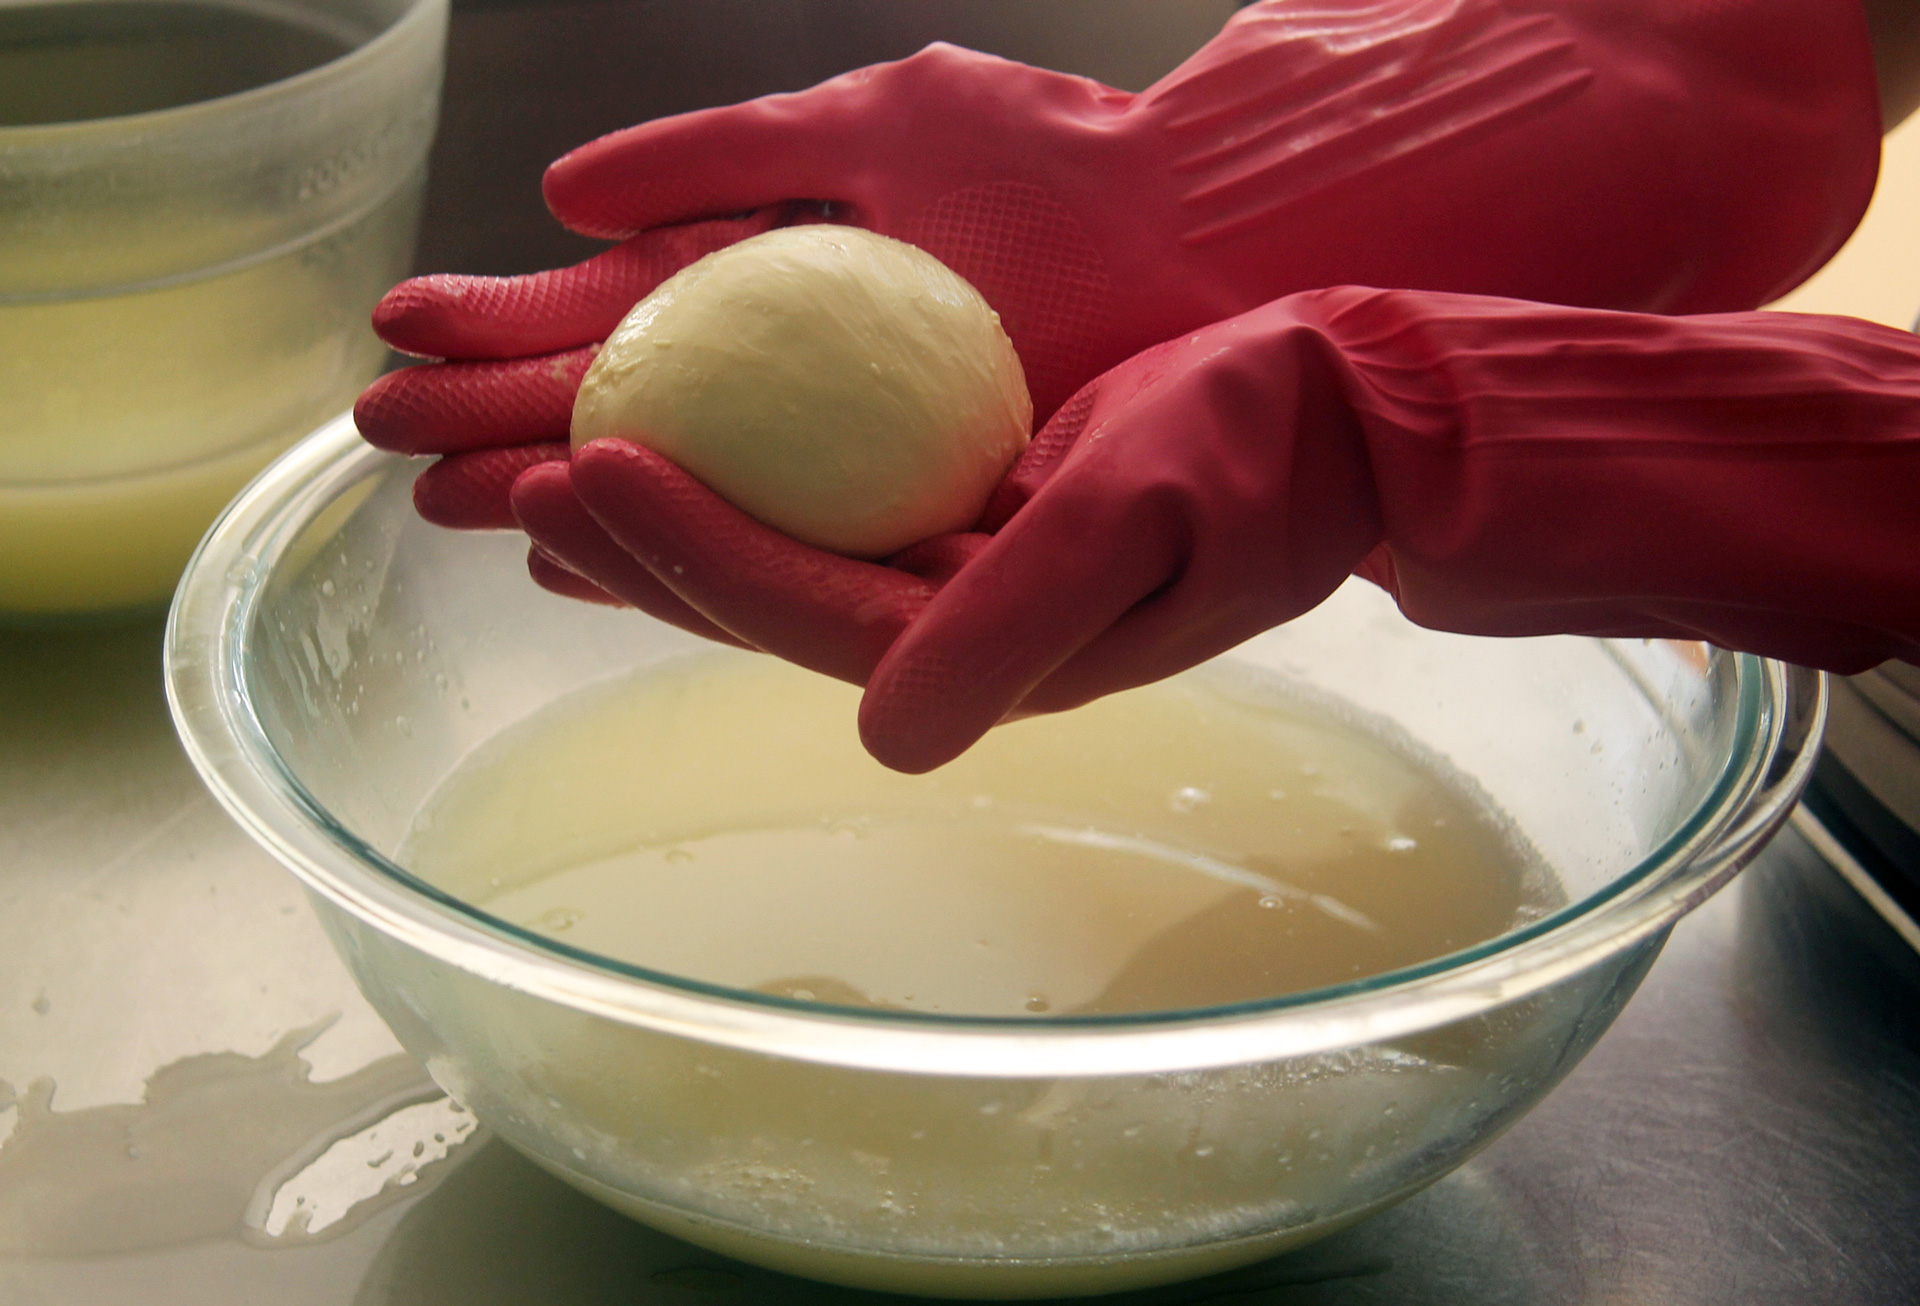 Shape the curds into a taut round ball and place in the room temperature whey to set.